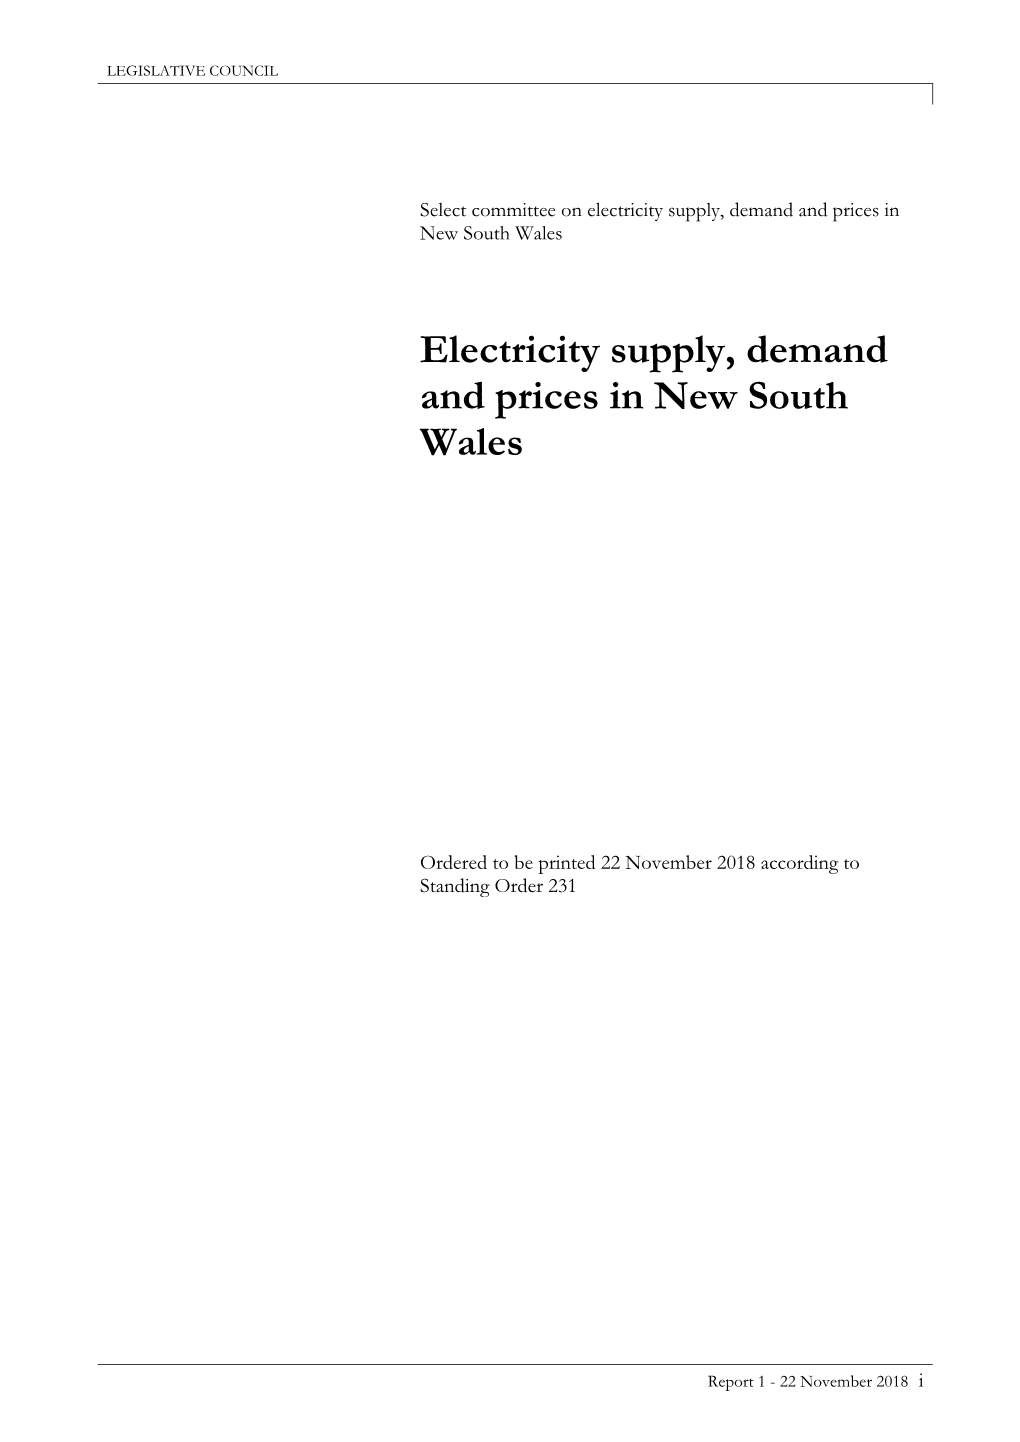 Electricity Supply, Demand and Prices in New South Wales